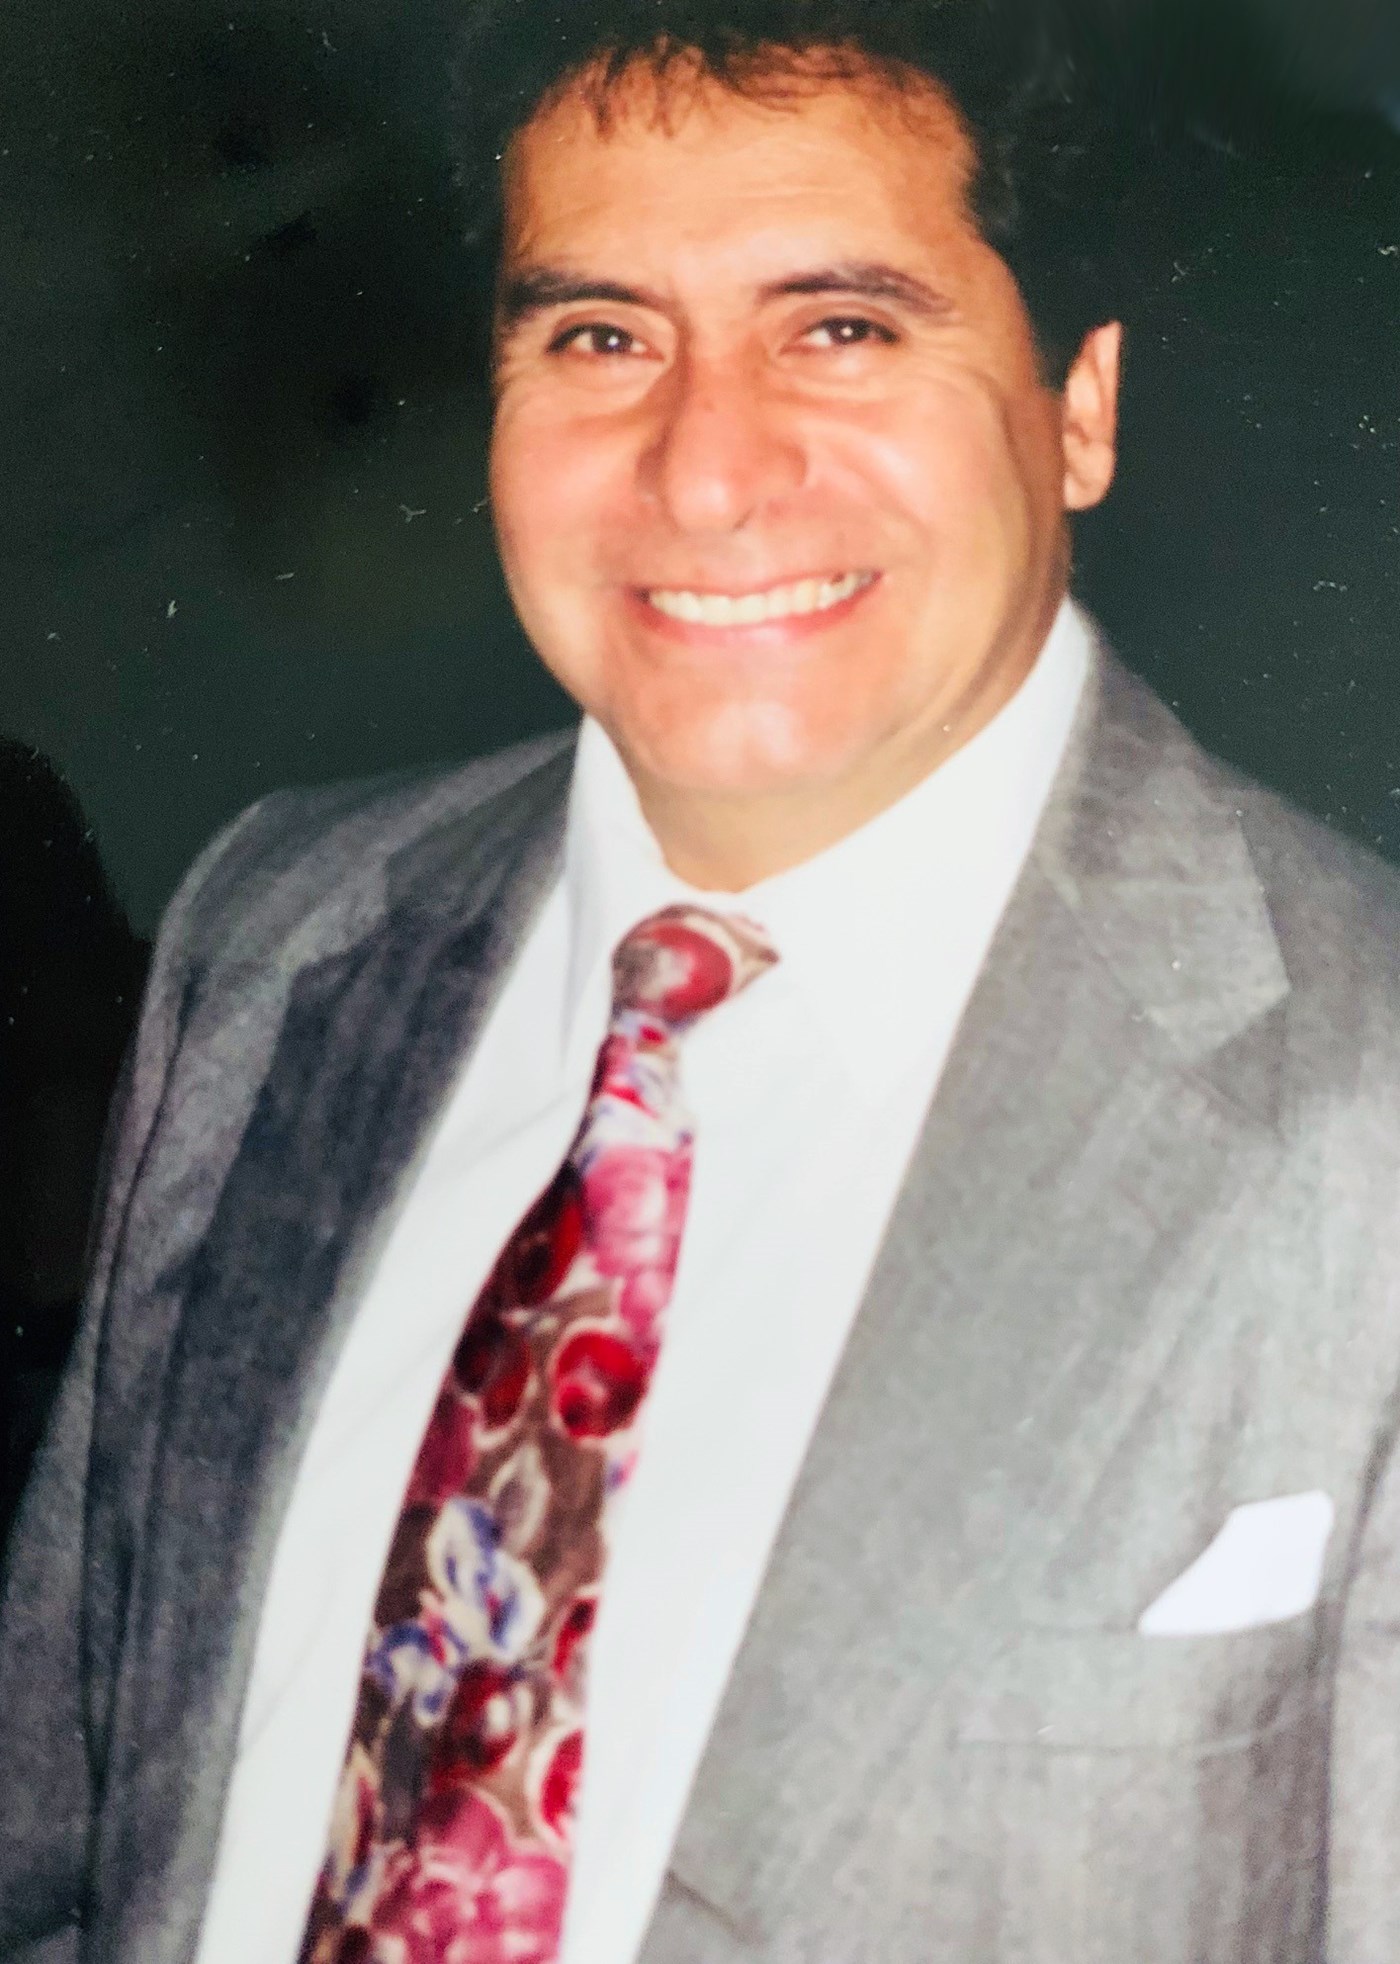 Juan Rodriguez wearing a grey suit, white short and red tie smiling at the camera.